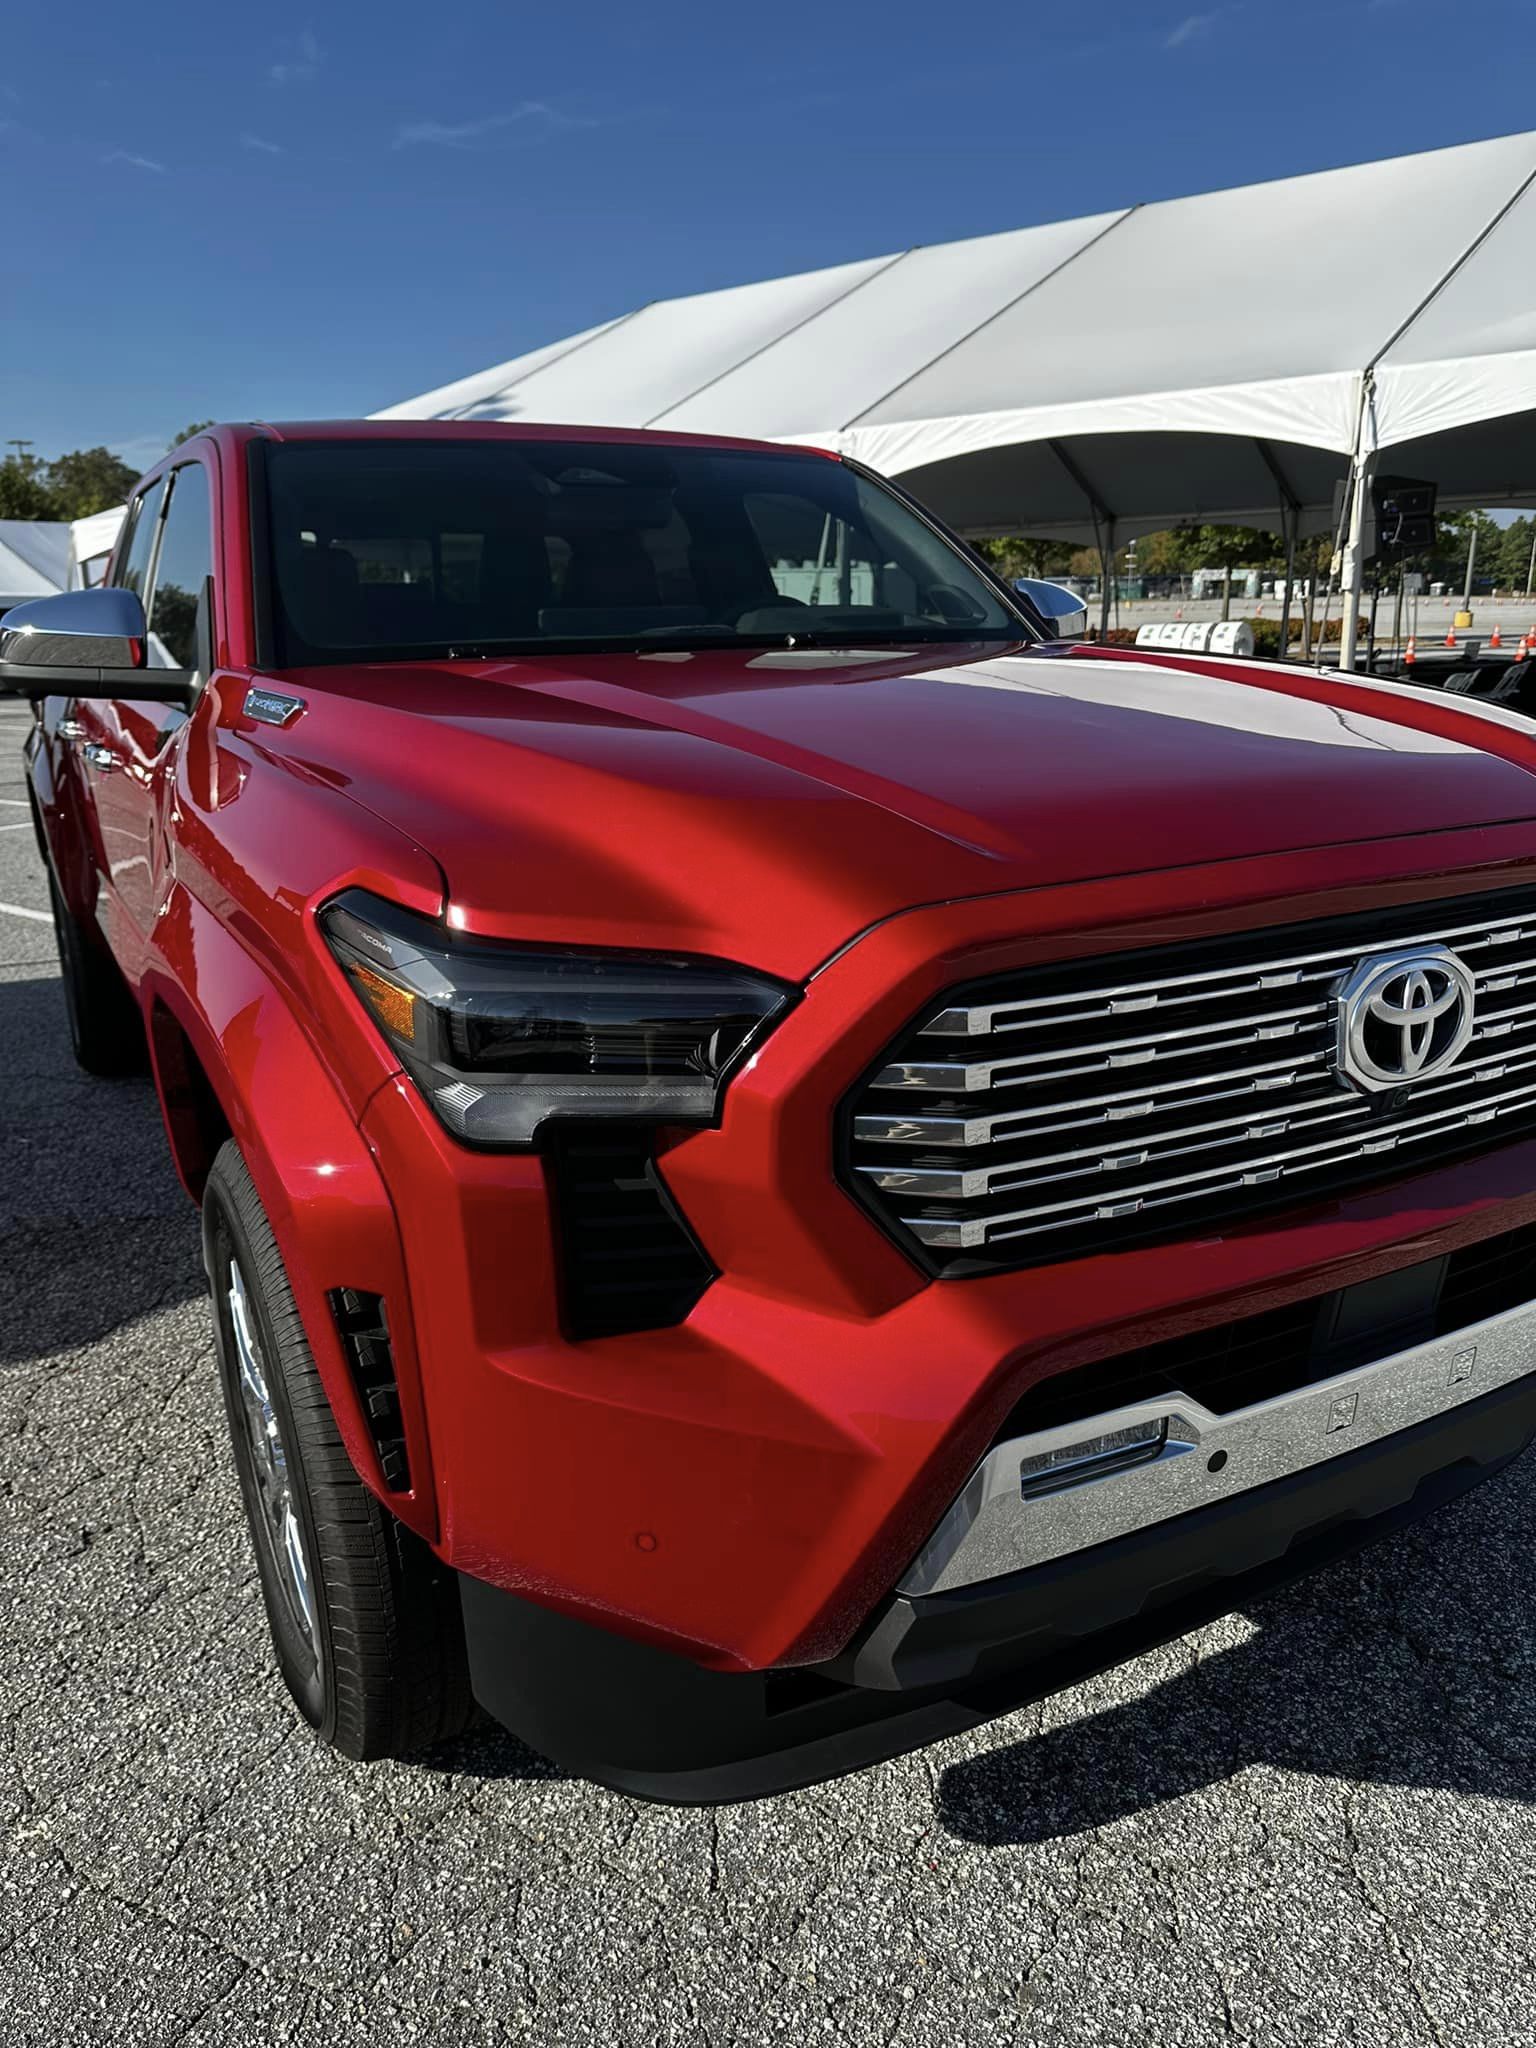 2024 Tacoma Official SUPERSONIC RED 2024 Tacoma Thread (4th Gen) 387093605_6600156413414986_8119780109407055447_n